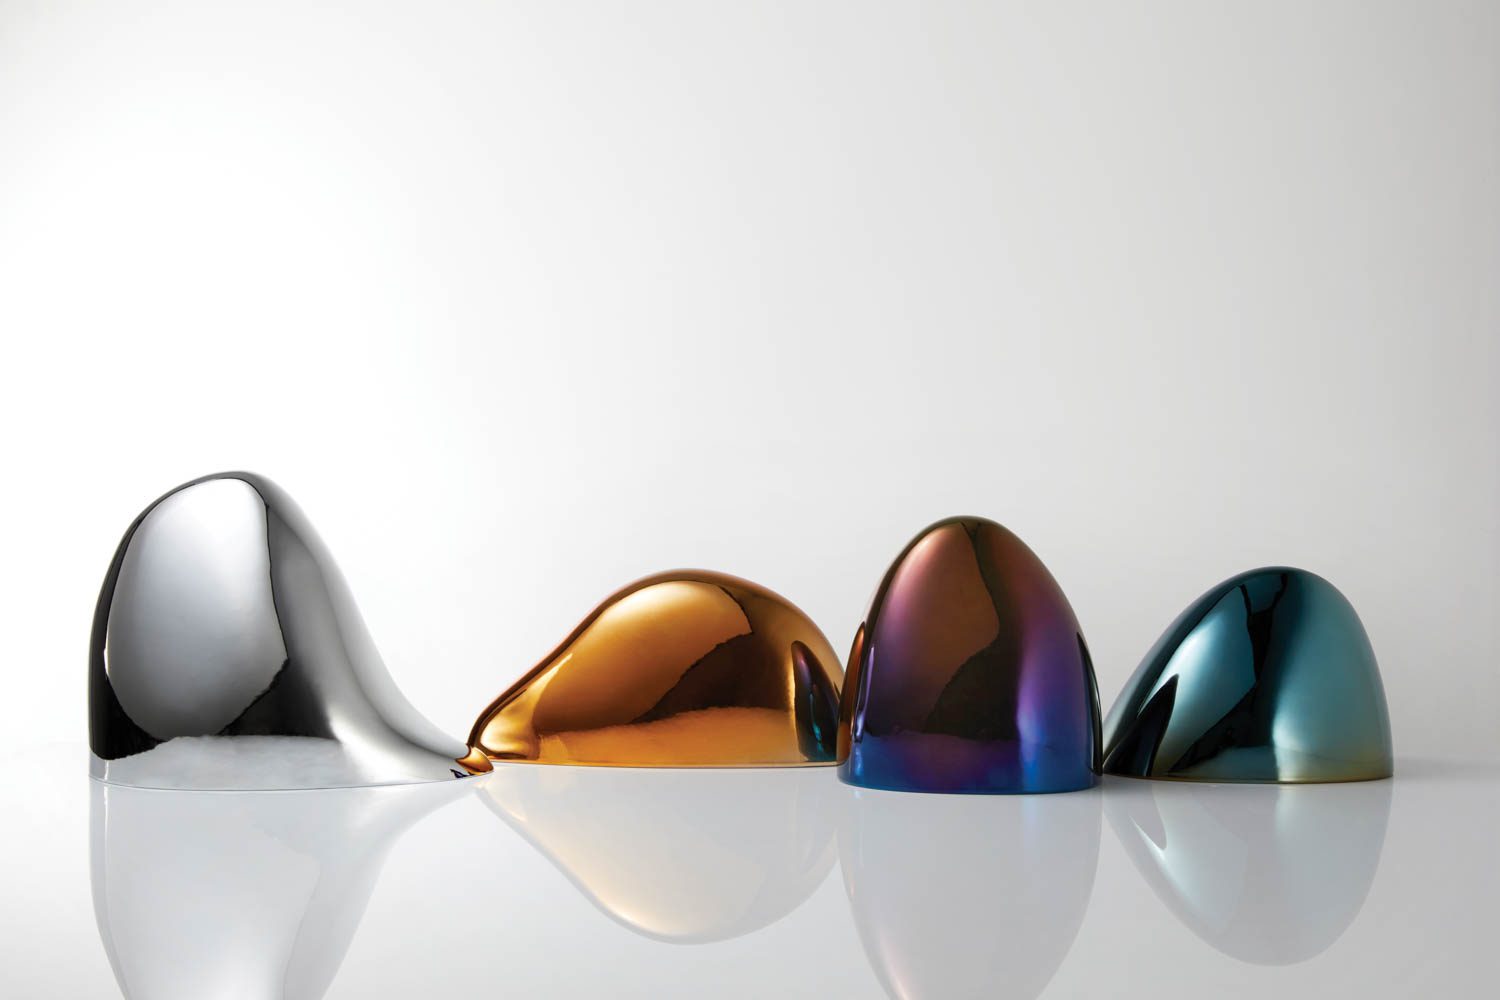 Gisela Colón’s Zenith limited-edition sculptures in metallic-coated porcelain by Bernardaud.